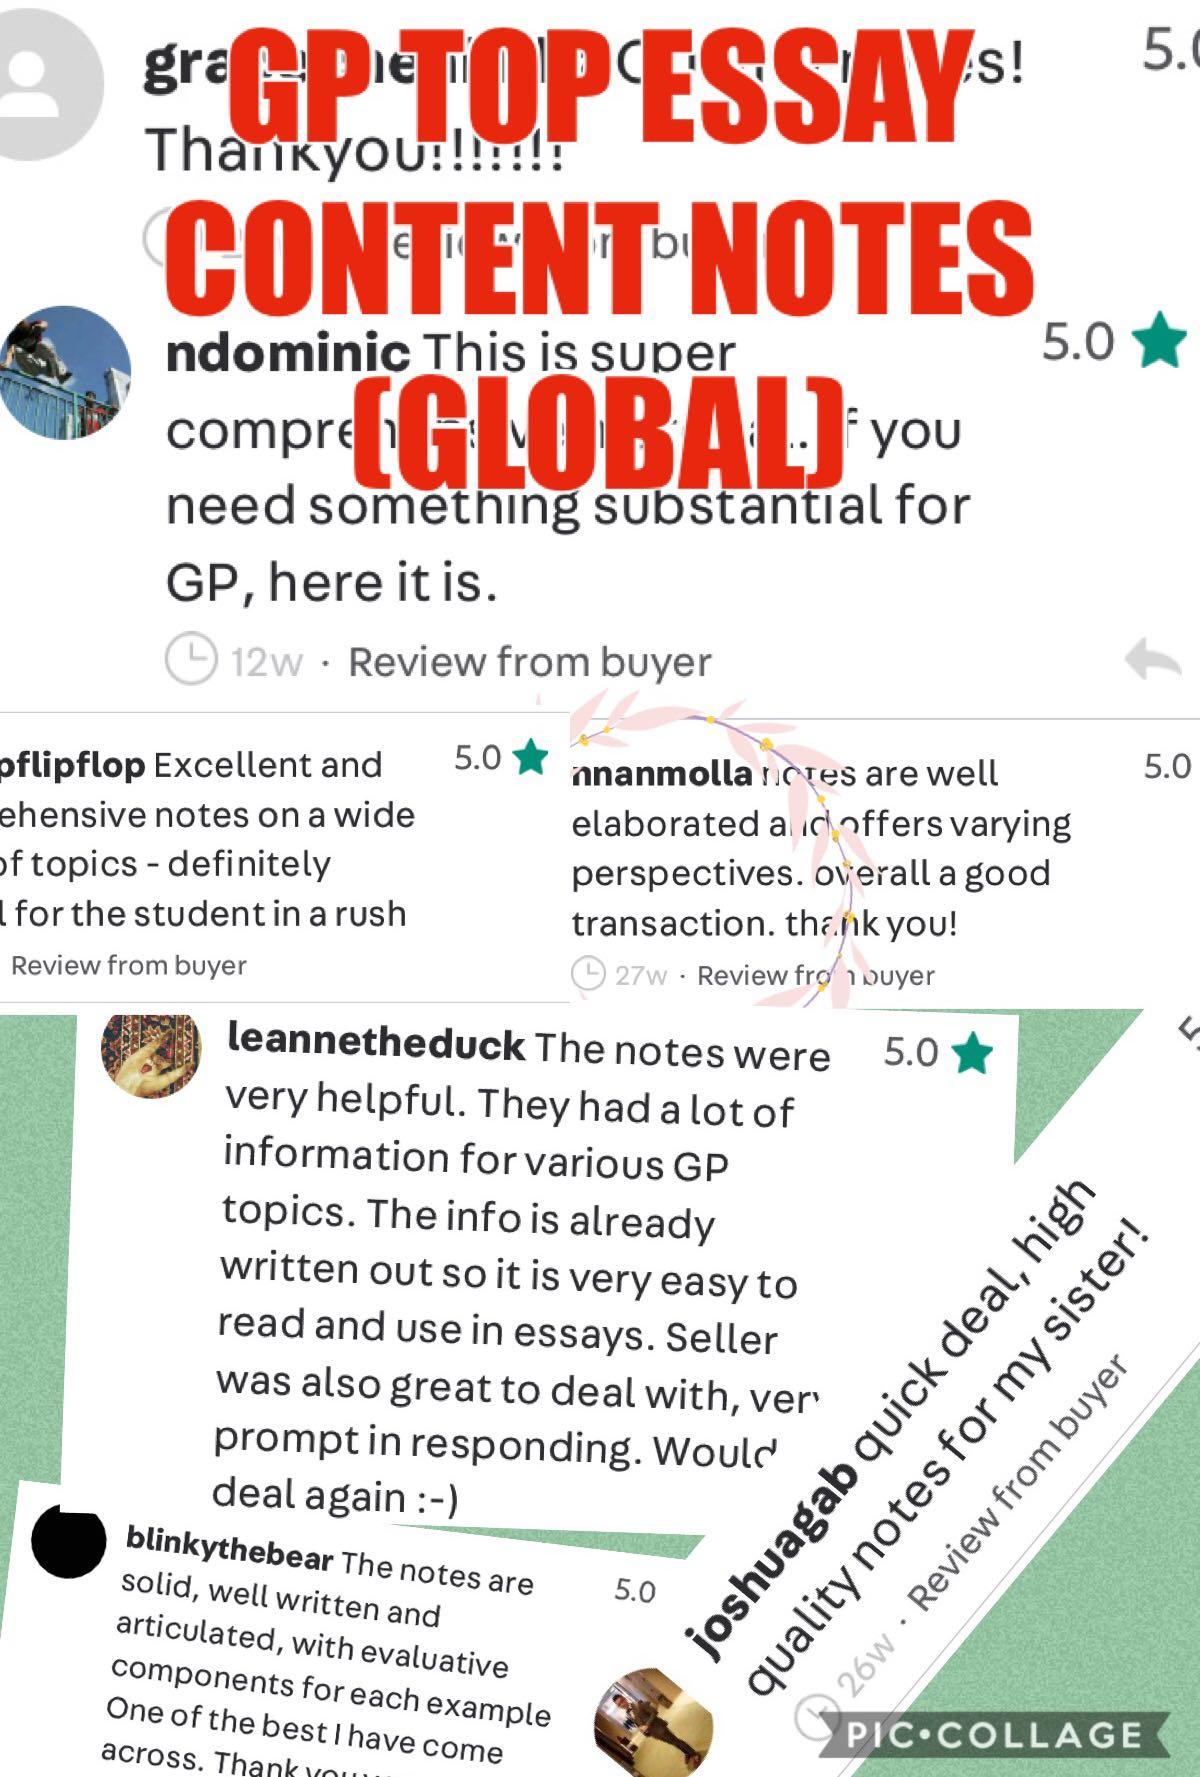 Global　TOP　paper　Hobbies　paper)　Books　UPDATED　level　Toys,　#madeinsg,　Carousell　Notes　A　H1　Essay　(general　on　GP　Magazines,　Issues　Books　summaries　Assessment　global　set]